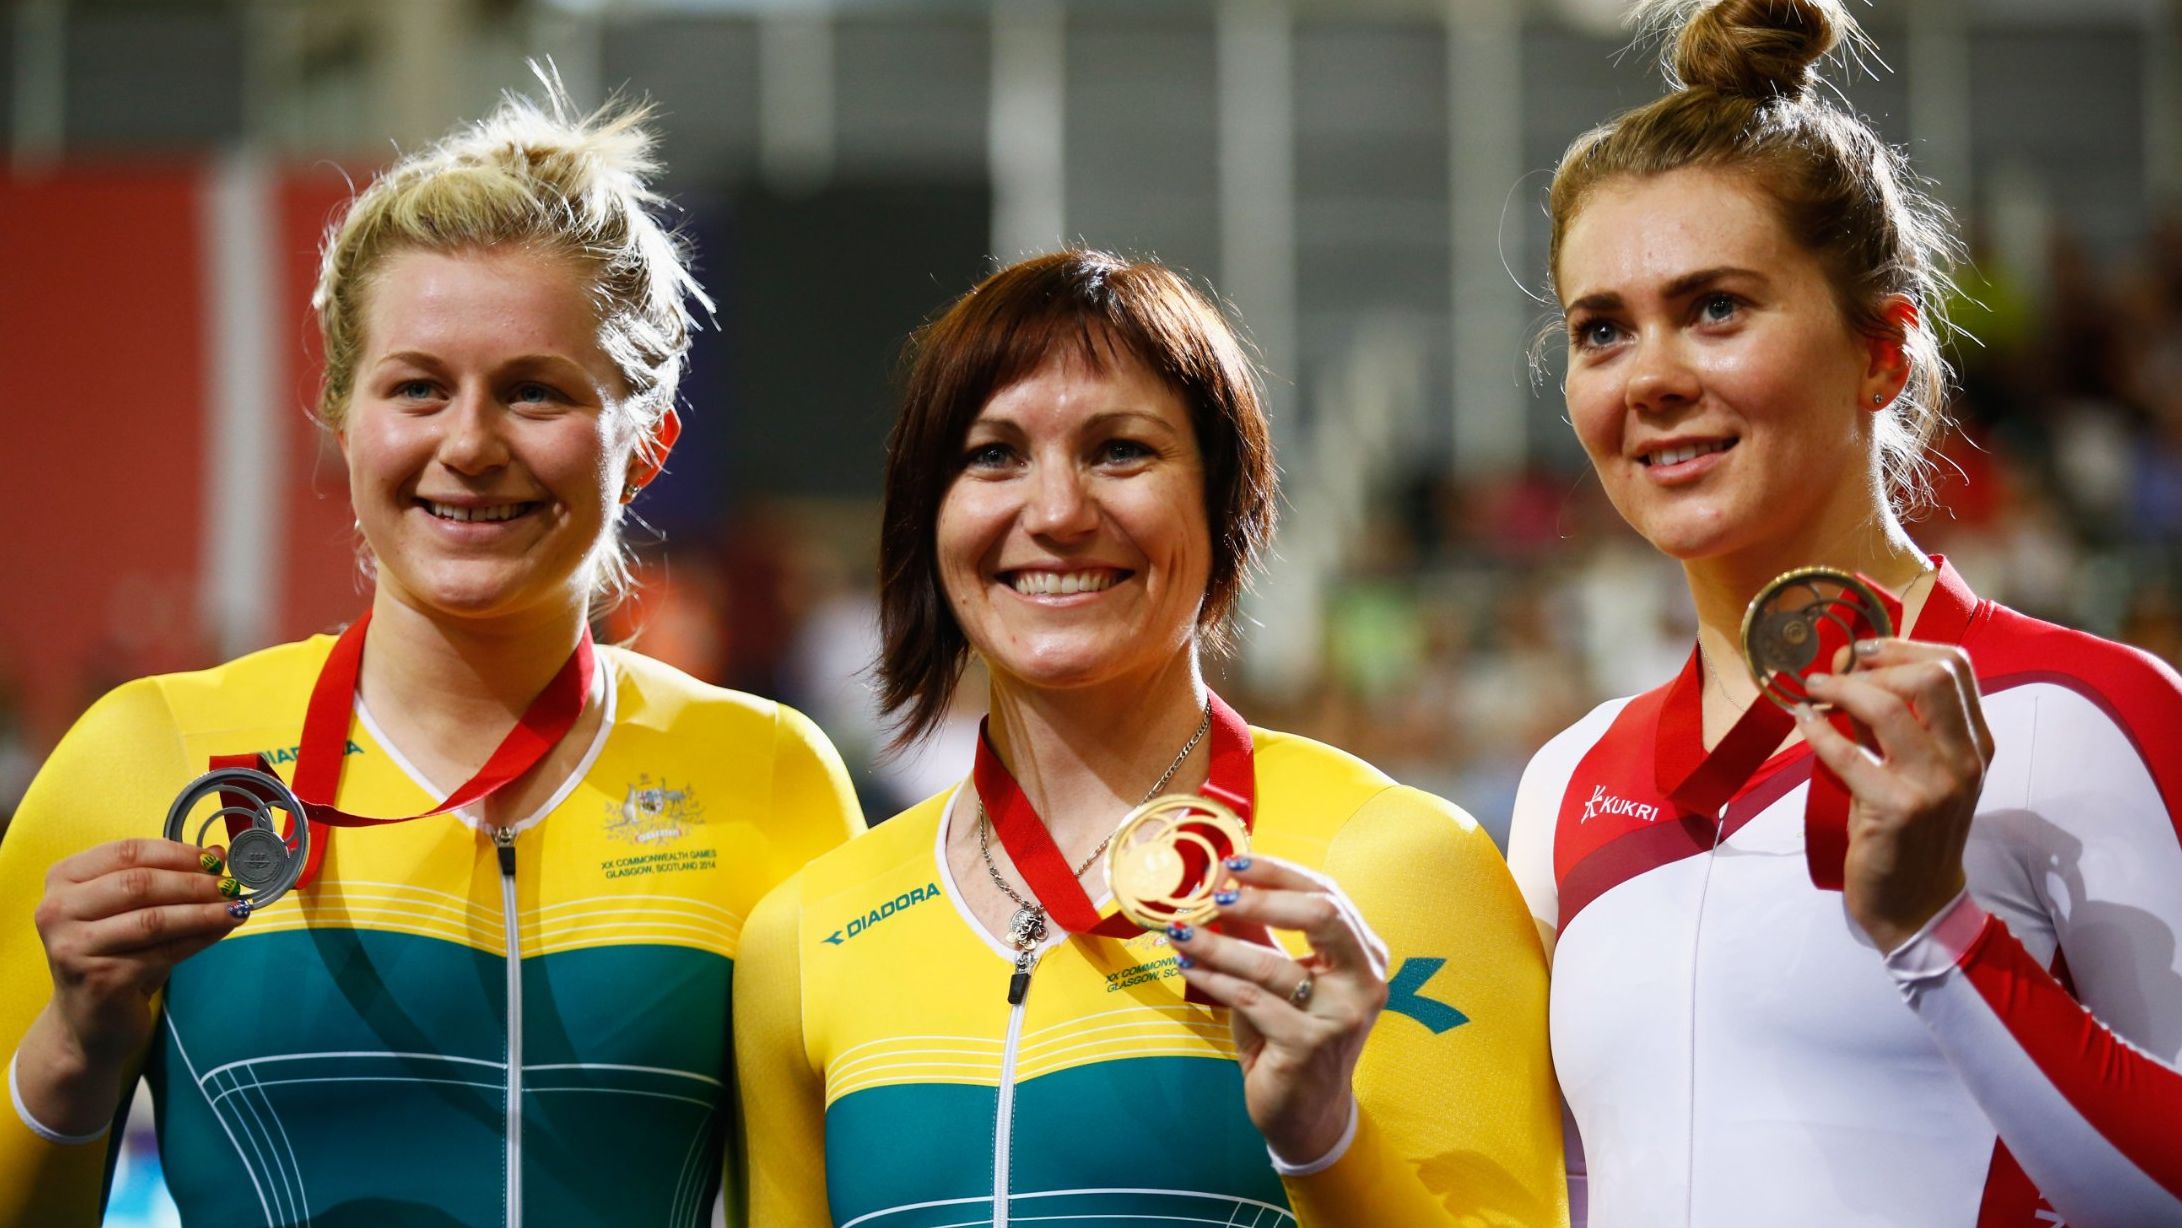 Varnish (far right) poses with bronze medal at the 2014 Commonwealth Games in Glasgow, Scotland.